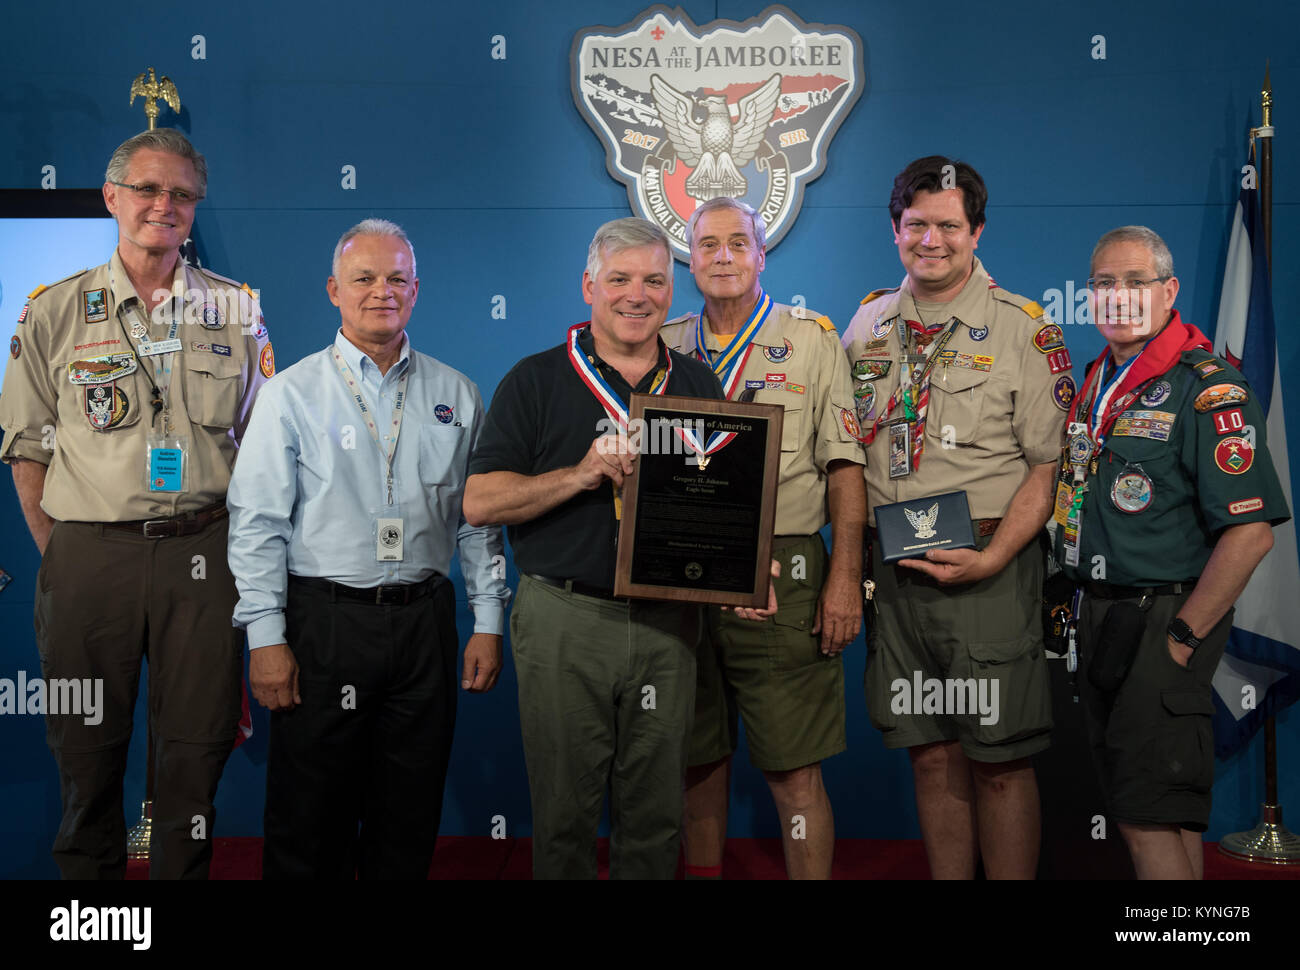 Greg “Box” Johnson, executive director of Center for the Advancement of Science in Space (CASIS) and former astronaut, third from left, receives an Distinguished Eagle Scout Award from Director of Strategic Initiatives, National Foundation, Boy Scouts of America Drew Glassford, left, NASA Acting Chief Technologist Douglas Terrier, Assistant Chief Scout Executive Don McChesney, National Eagle Scout (NESA) Committee member Todd Plotner, and Physician Brad Epstein, right, during the Boy Scouts of America National Jamboree, Tuesday, July 25, 2017 at the Summit Bechtel Reserve in Glen Jean, West Vi Stock Photo